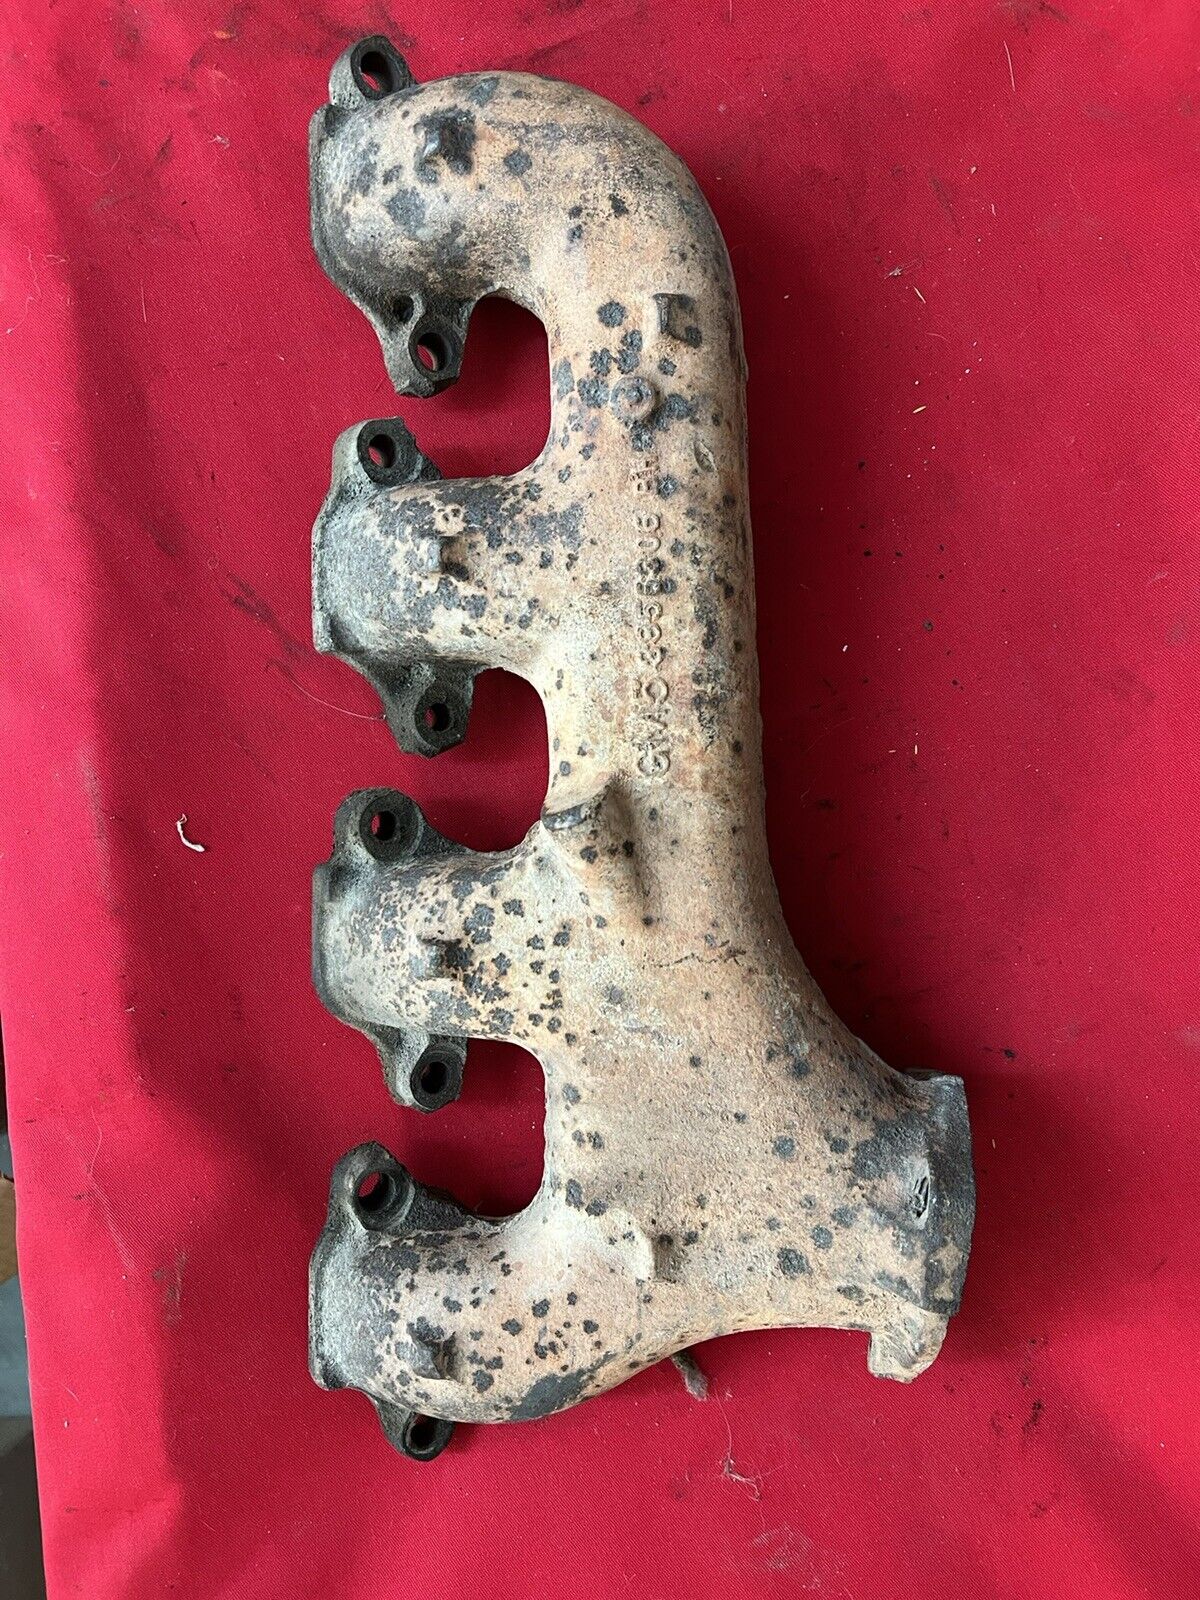 1965 Chevy Impala Biscayne Bel Air Exhaust Manifold Right 396 427 Big Block 